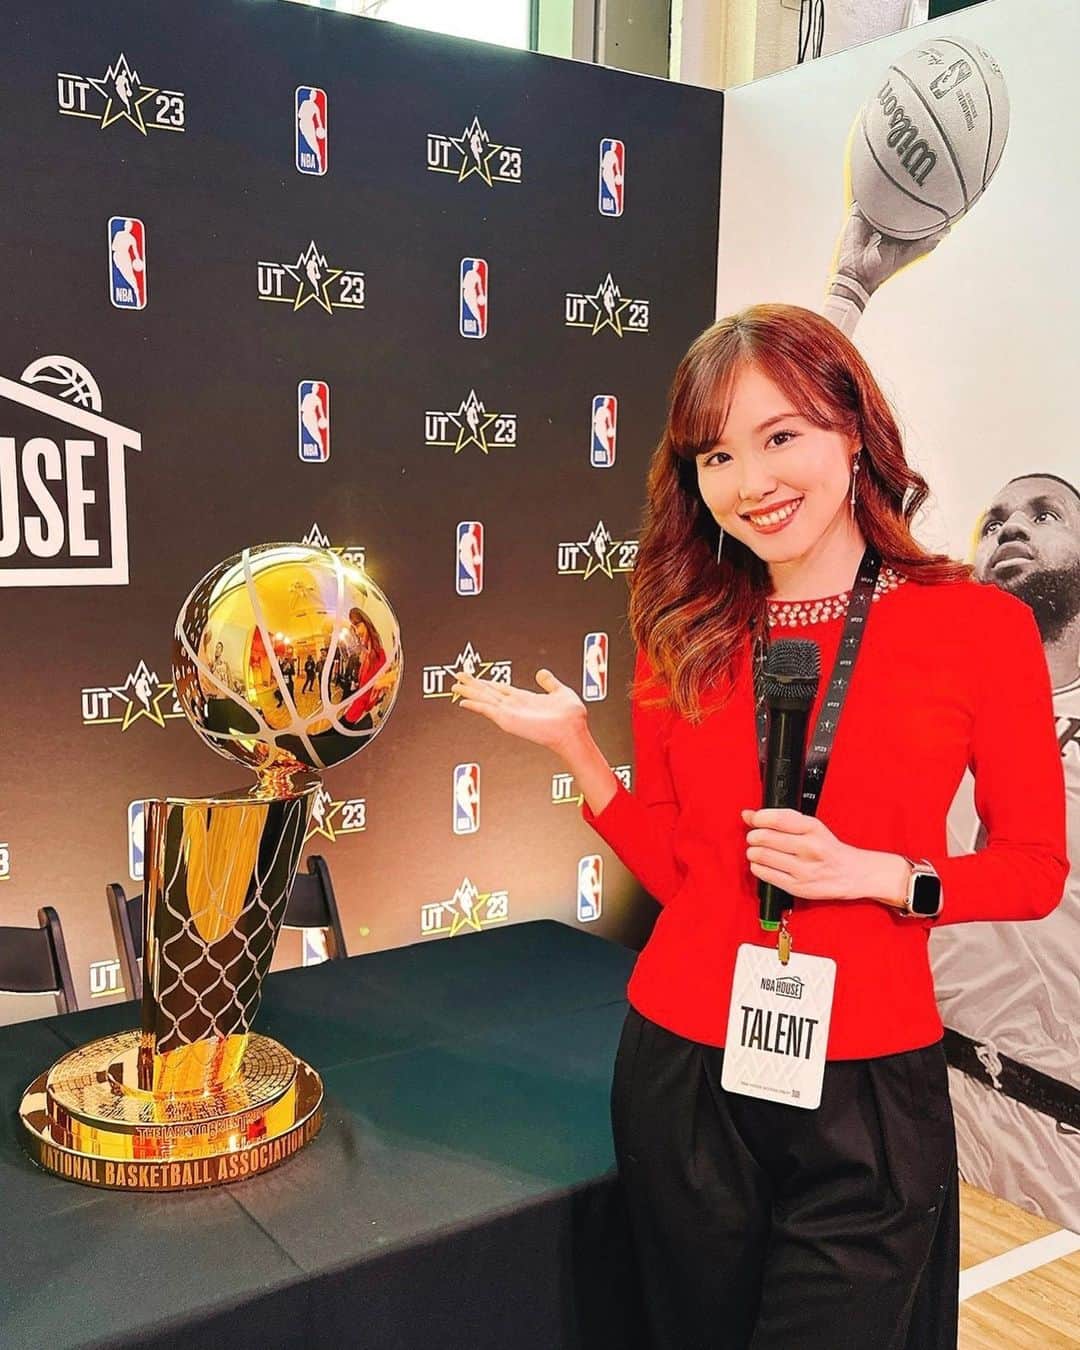 メロディー・モリタさんのインスタグラム写真 - (メロディー・モリタInstagram)「Arrived in Salt Lake City for @NBA All-Star 2023!🌟✨ Since 2018, I’ve covered NBA All-Star in LA, Charlotte, and Chicago, so this is my fourth one and I’m so excited to be here with such a fun, awesome team😊🙌  I started off this morning at #NBAHouse for creators where I challenged myself to a basketball shooting game even though I have absolutely zero experience. A snippet is uploaded on NBA Japan’s Twitter🙈  The #NBACrossover is at this huge convention center with booths/areas/courts enjoyable for people of all ages. There was even a 20-feet high basketball hoop, and I found some team jackets written in Japanese!🇯🇵  The Rising Stars Game was definitely a close one, but who stood out to me was Ventura Alvarado who controlled the flow of the game and then sealed it with a game-winning 3-pointer (2nd slide), making him the MVP!🏆 Also, this is unrelated to the game, but I had to include the "fusion” of LeBron James Harden they showed on the jumbotron😂  Looking forward to interviewing, filming, and ofc enjoying the games throughout the weekend!🔥  NBAオールスター2023で、Salt Lake Cityに！✨ 2018年より、LA、シャーロット、シカゴに続き、光栄にも4度目のNBAオールスターに来ることができました。  初日は朝からクリエイター専用の「NBA HOUSE」へ🏀 バスケは完全にど素人な私がバスケ対決をしたり...（笑）その模様はNBA JAPANの公式Twitterに一部アップされています🙈💦  「NBA Crossover」では高さおよそ6mに設置されたバスケットゴールや、チーム名が日本語で書かれたジャケットまで売られていました！世代・国籍問わず楽しめるコンベンションセンターです✨  夜は若手選手たちのRising Stars Game! チームPauのアルヴァラード選手が試合の流れをコントロールしながらファイナルでの決勝点をスリーで決め（スライド2枚目）、会場を盛り上げるプレーをたくさん見せてくれました！MVPもゲット🏆  試合とは関係ないのですが、ハーデン選手とレブロン選手を合成させた写真がとても面白く気に入ってしまいました😂  明日はインタビューや、サタデーナイトのイベントで盛りだくさん！日本在住の皆さんは、オールスターをNBA楽天で一緒に楽しんで下さいね🤗 #NBAAllStar #nbaallstarweekend #NBAオールスター」2月18日 16時55分 - melodeemorita